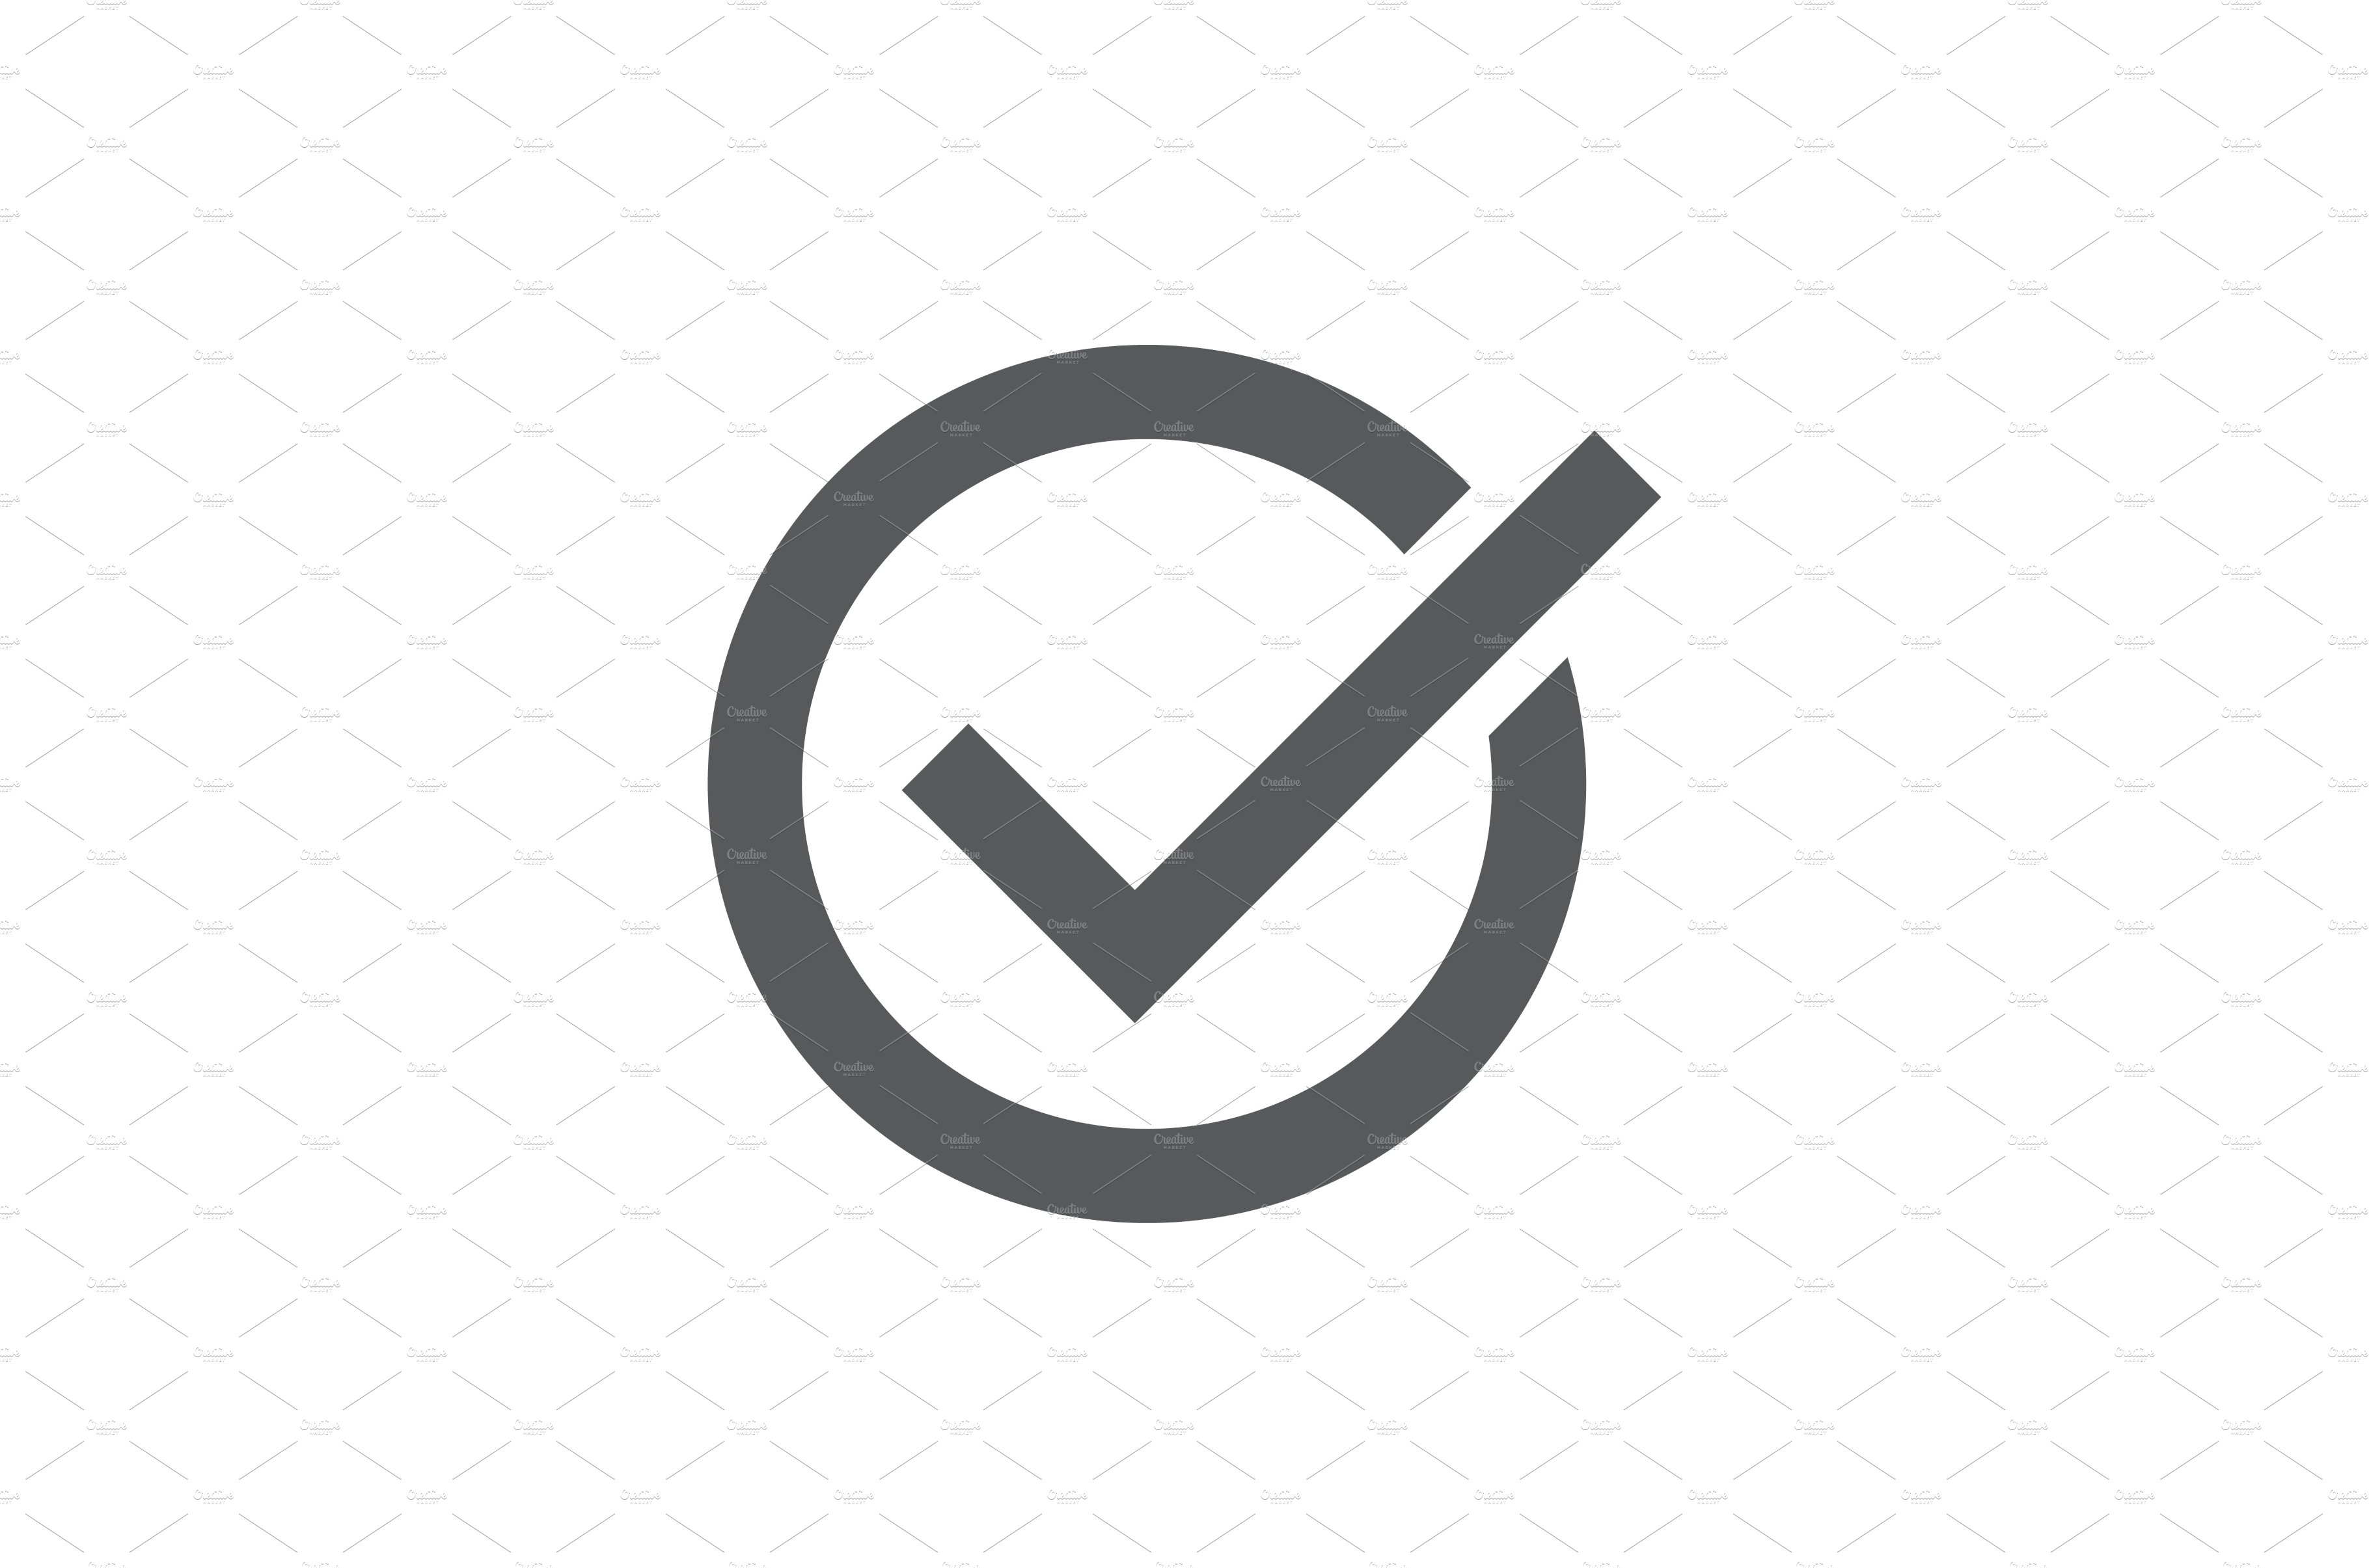 approval icon png